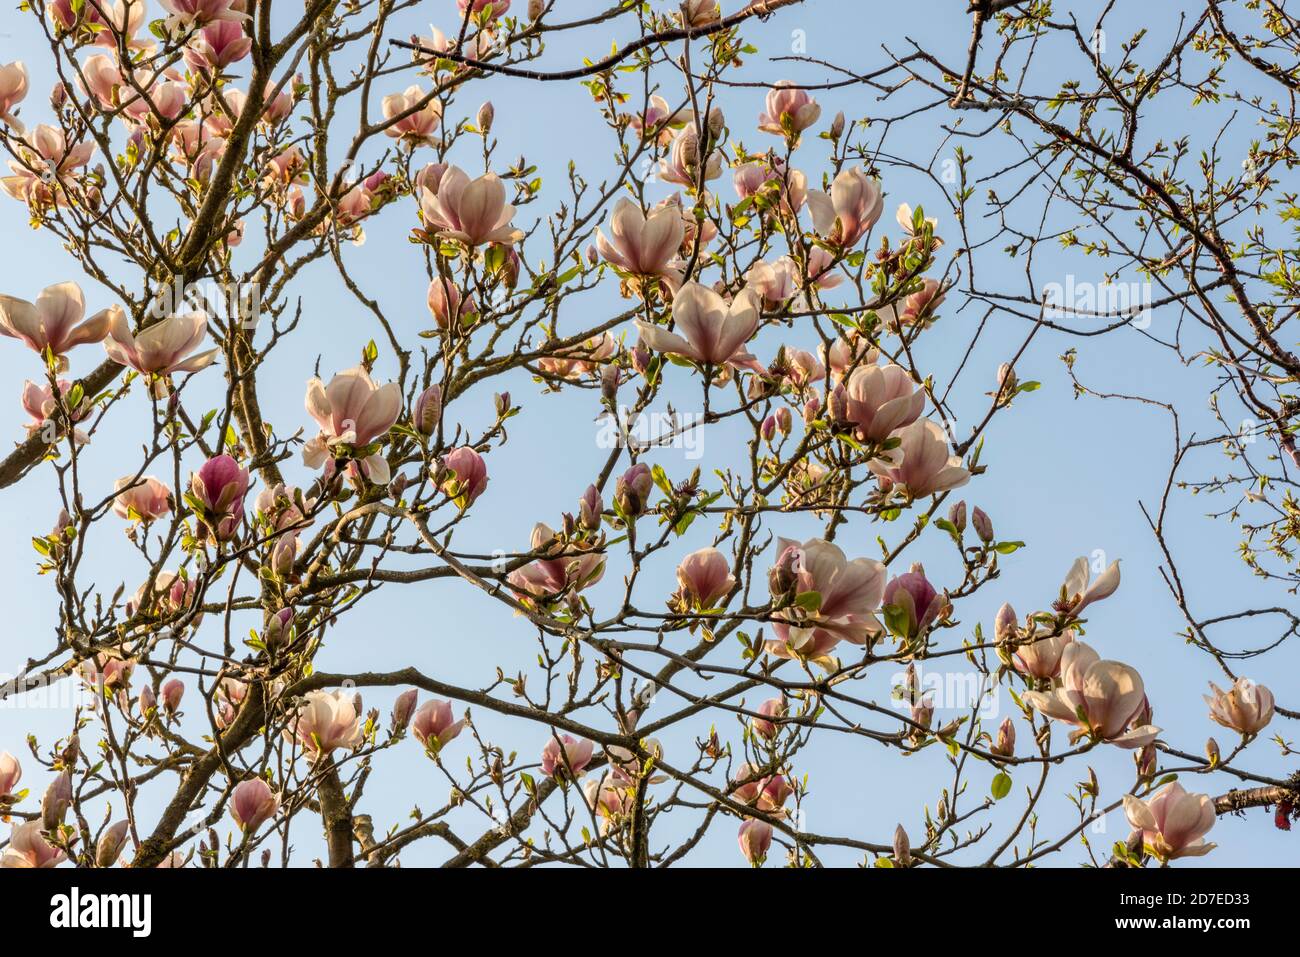 Mass of large pink flowers of Magnolia × soulangeana 'Verbanica' with emerging new leaves high in the tree, against a flat blue sky in Spring. Stock Photo